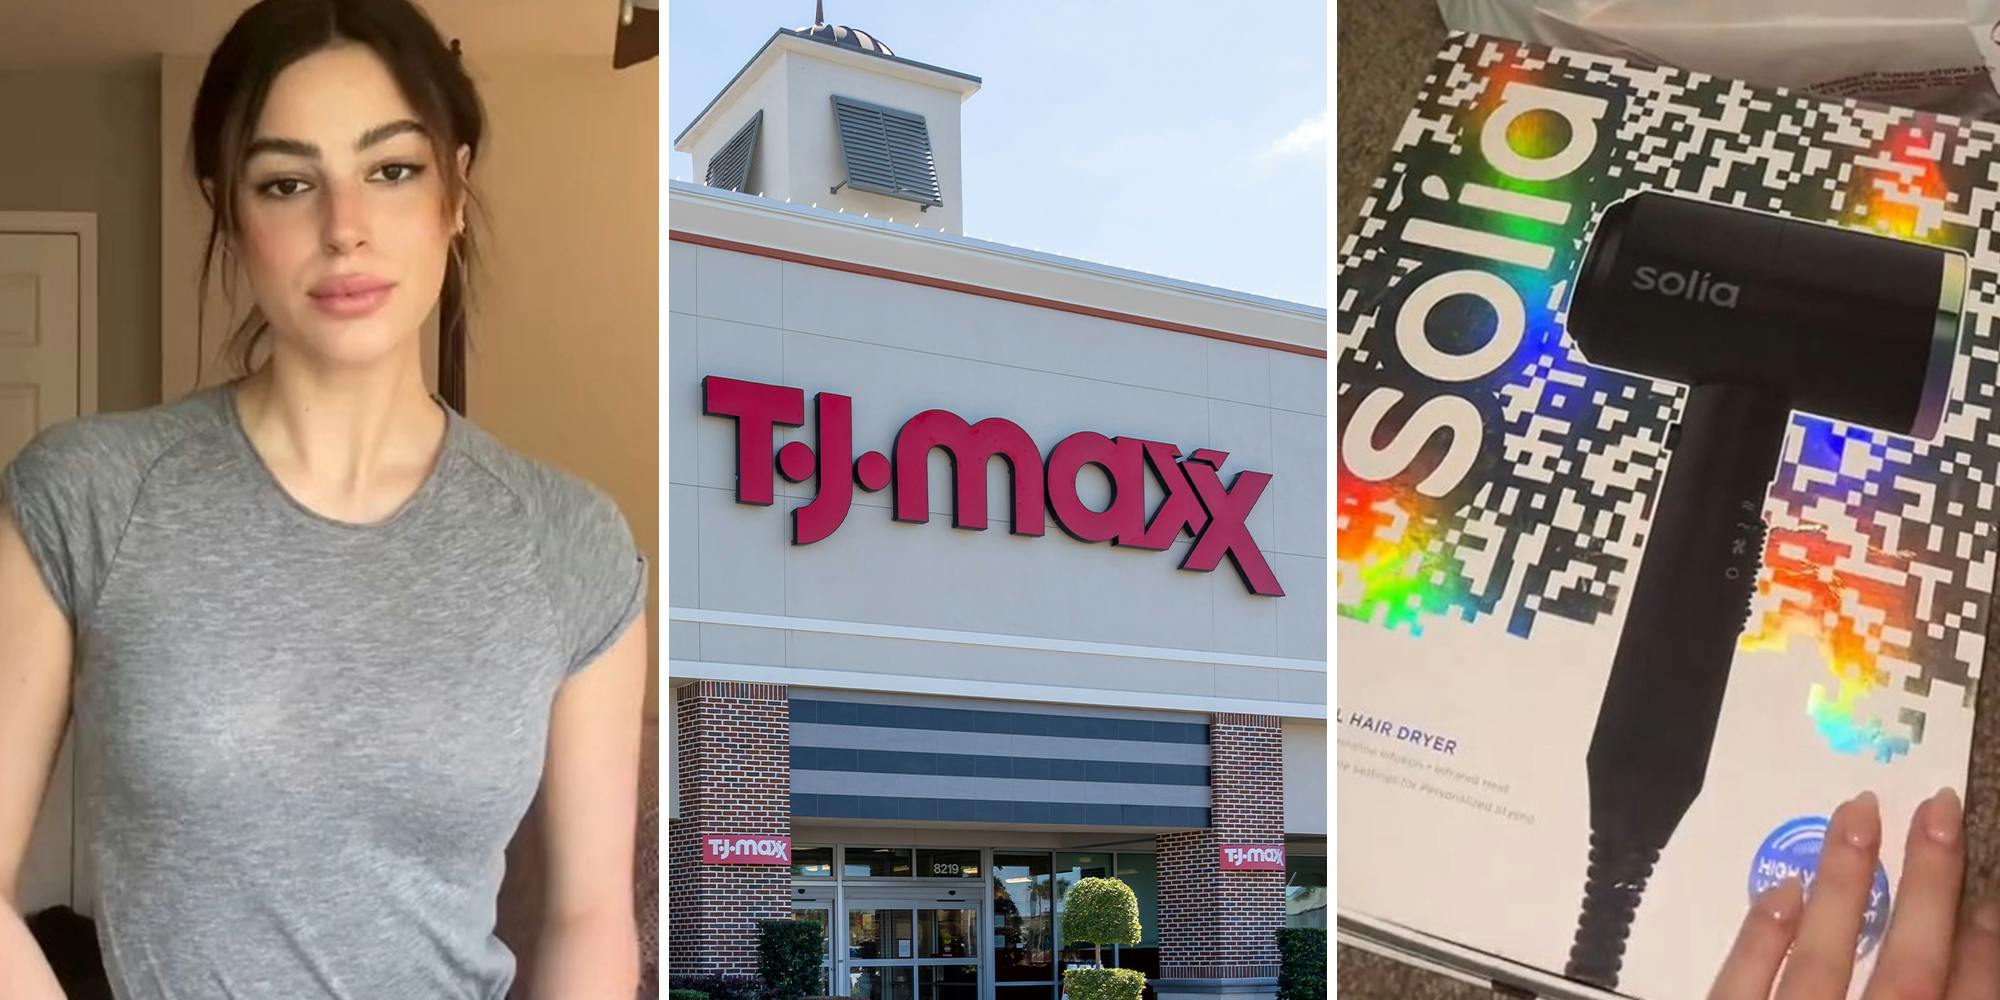 Shopper warns against shopping at T.J. Maxx after buying hair dryer